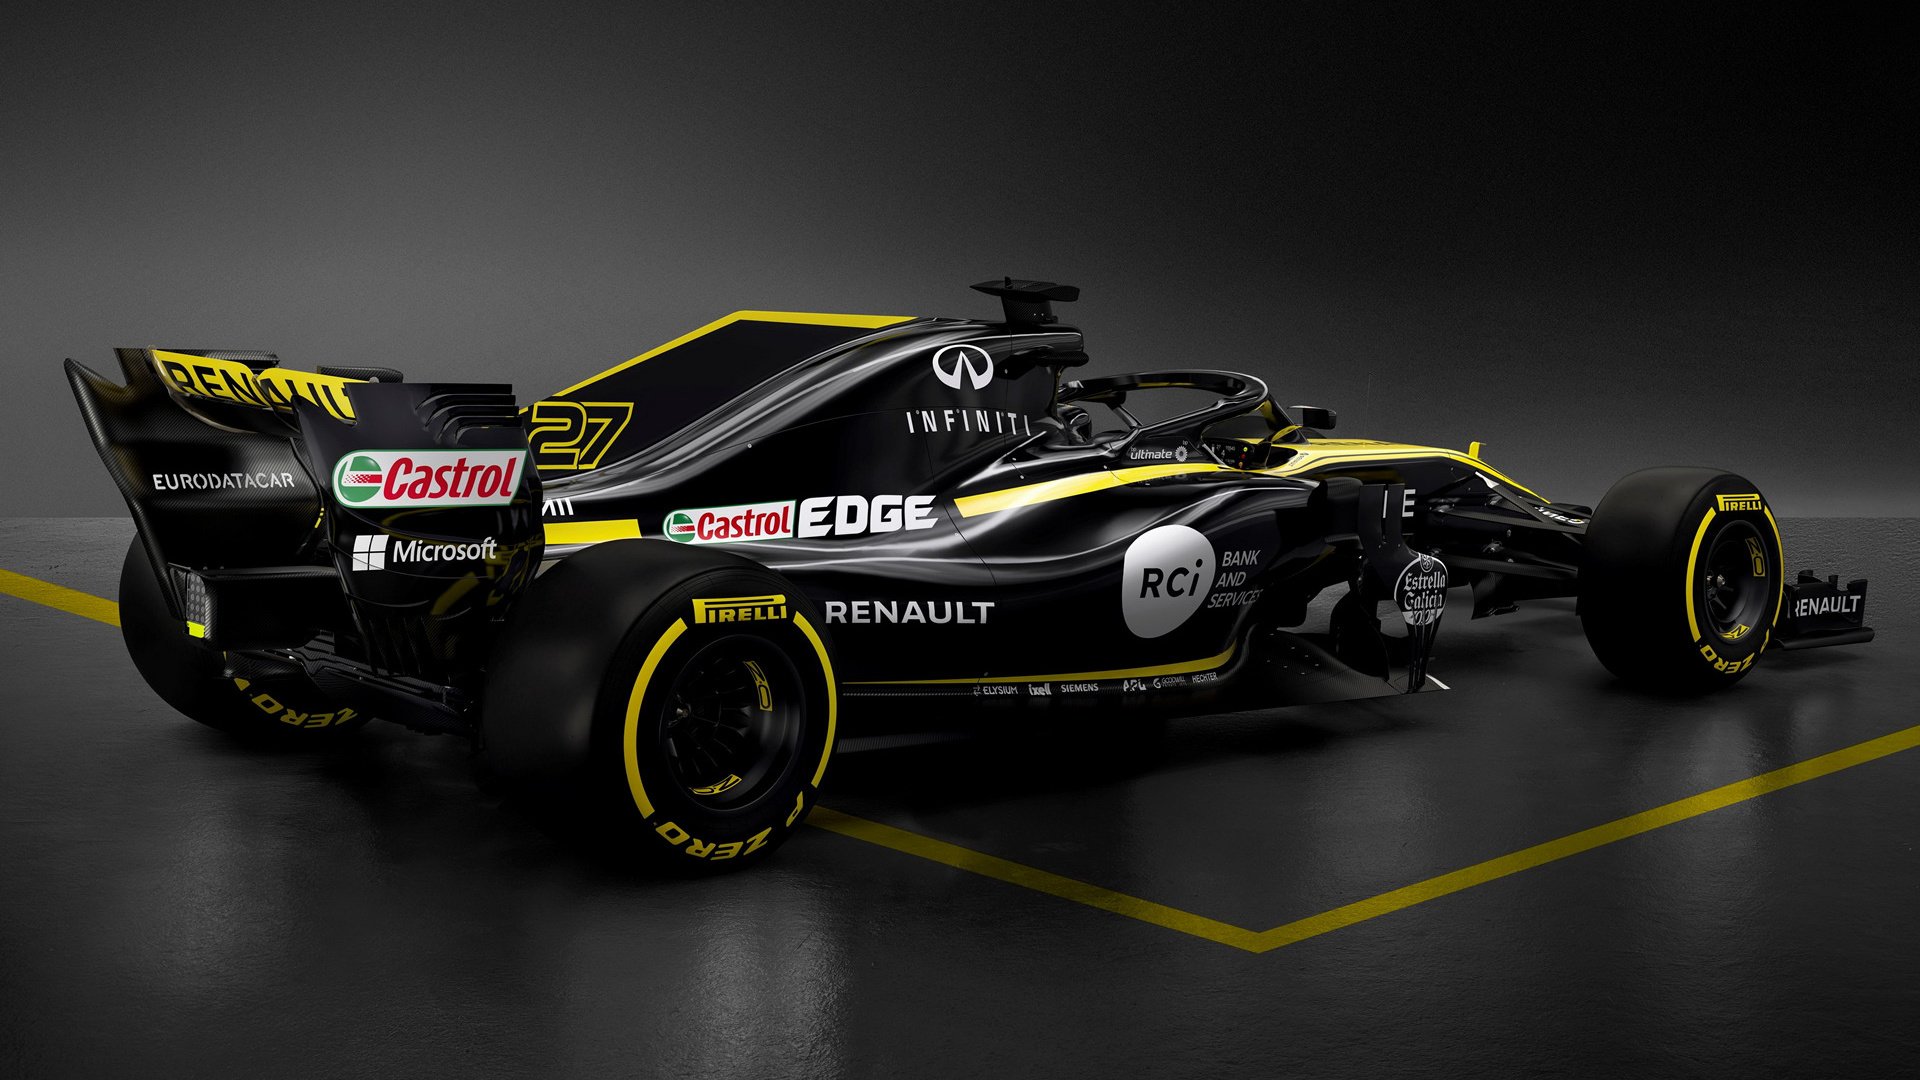 Renault F1 Wallpapers